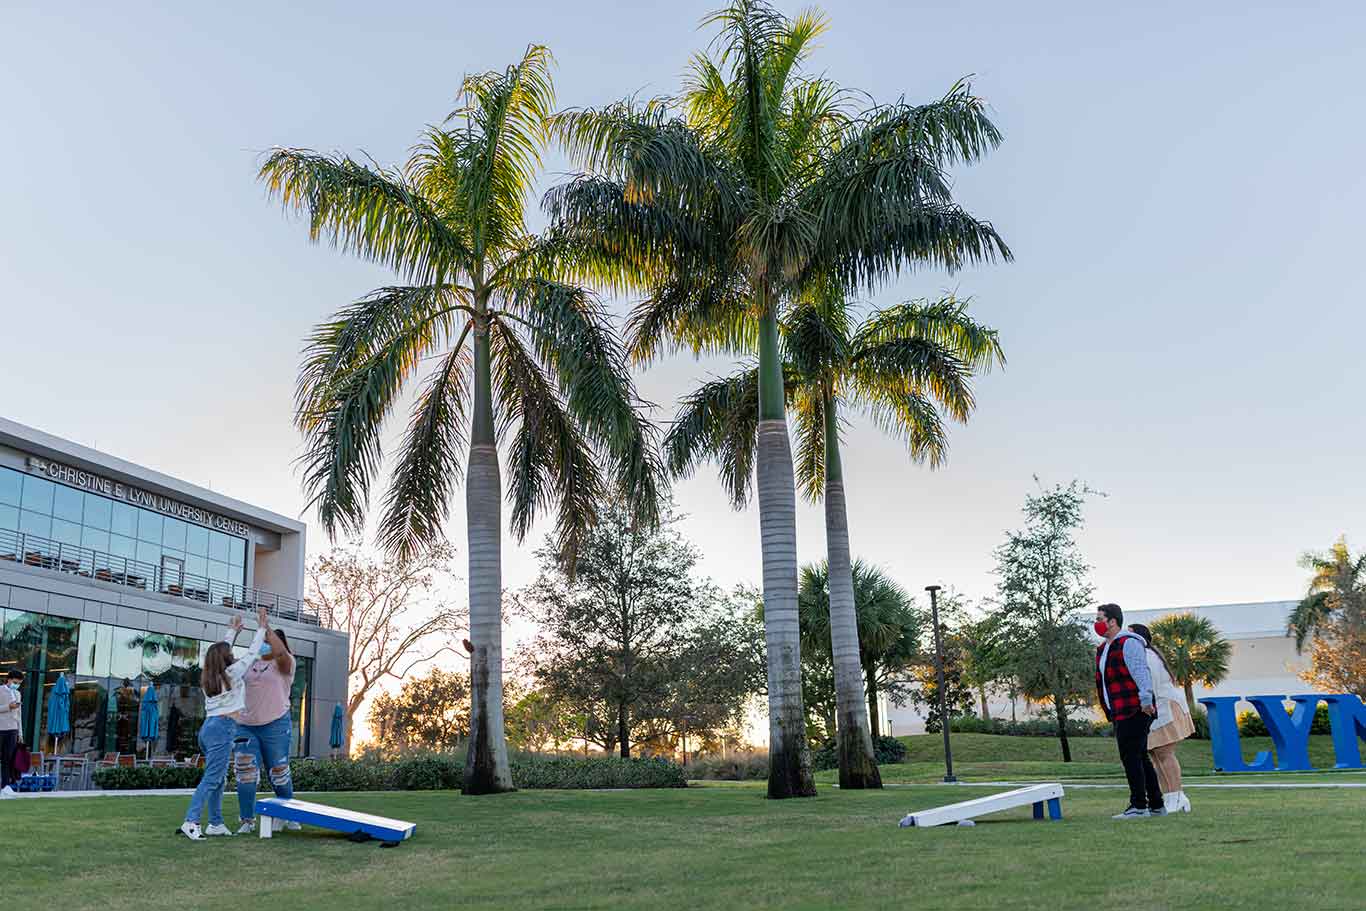 Students playing corn hole in the park